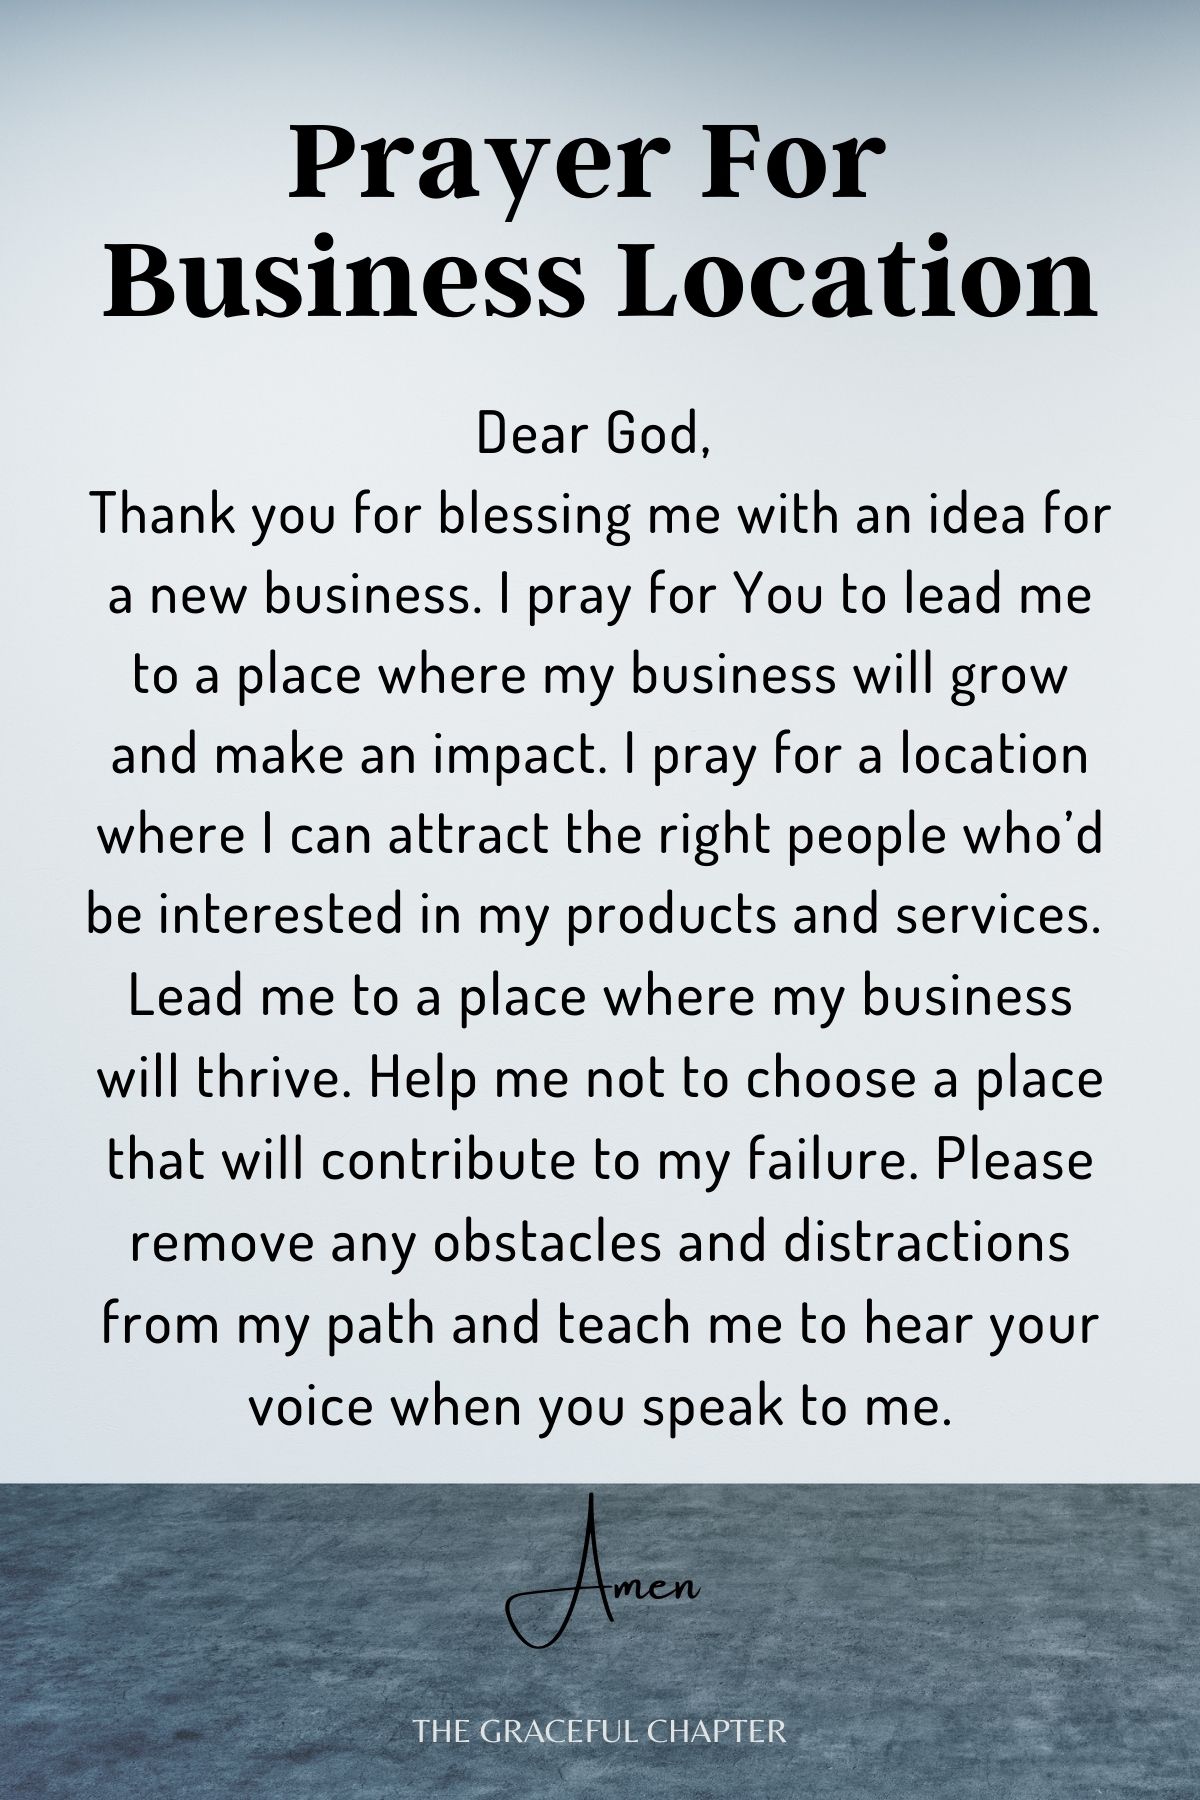 Prayer for business location